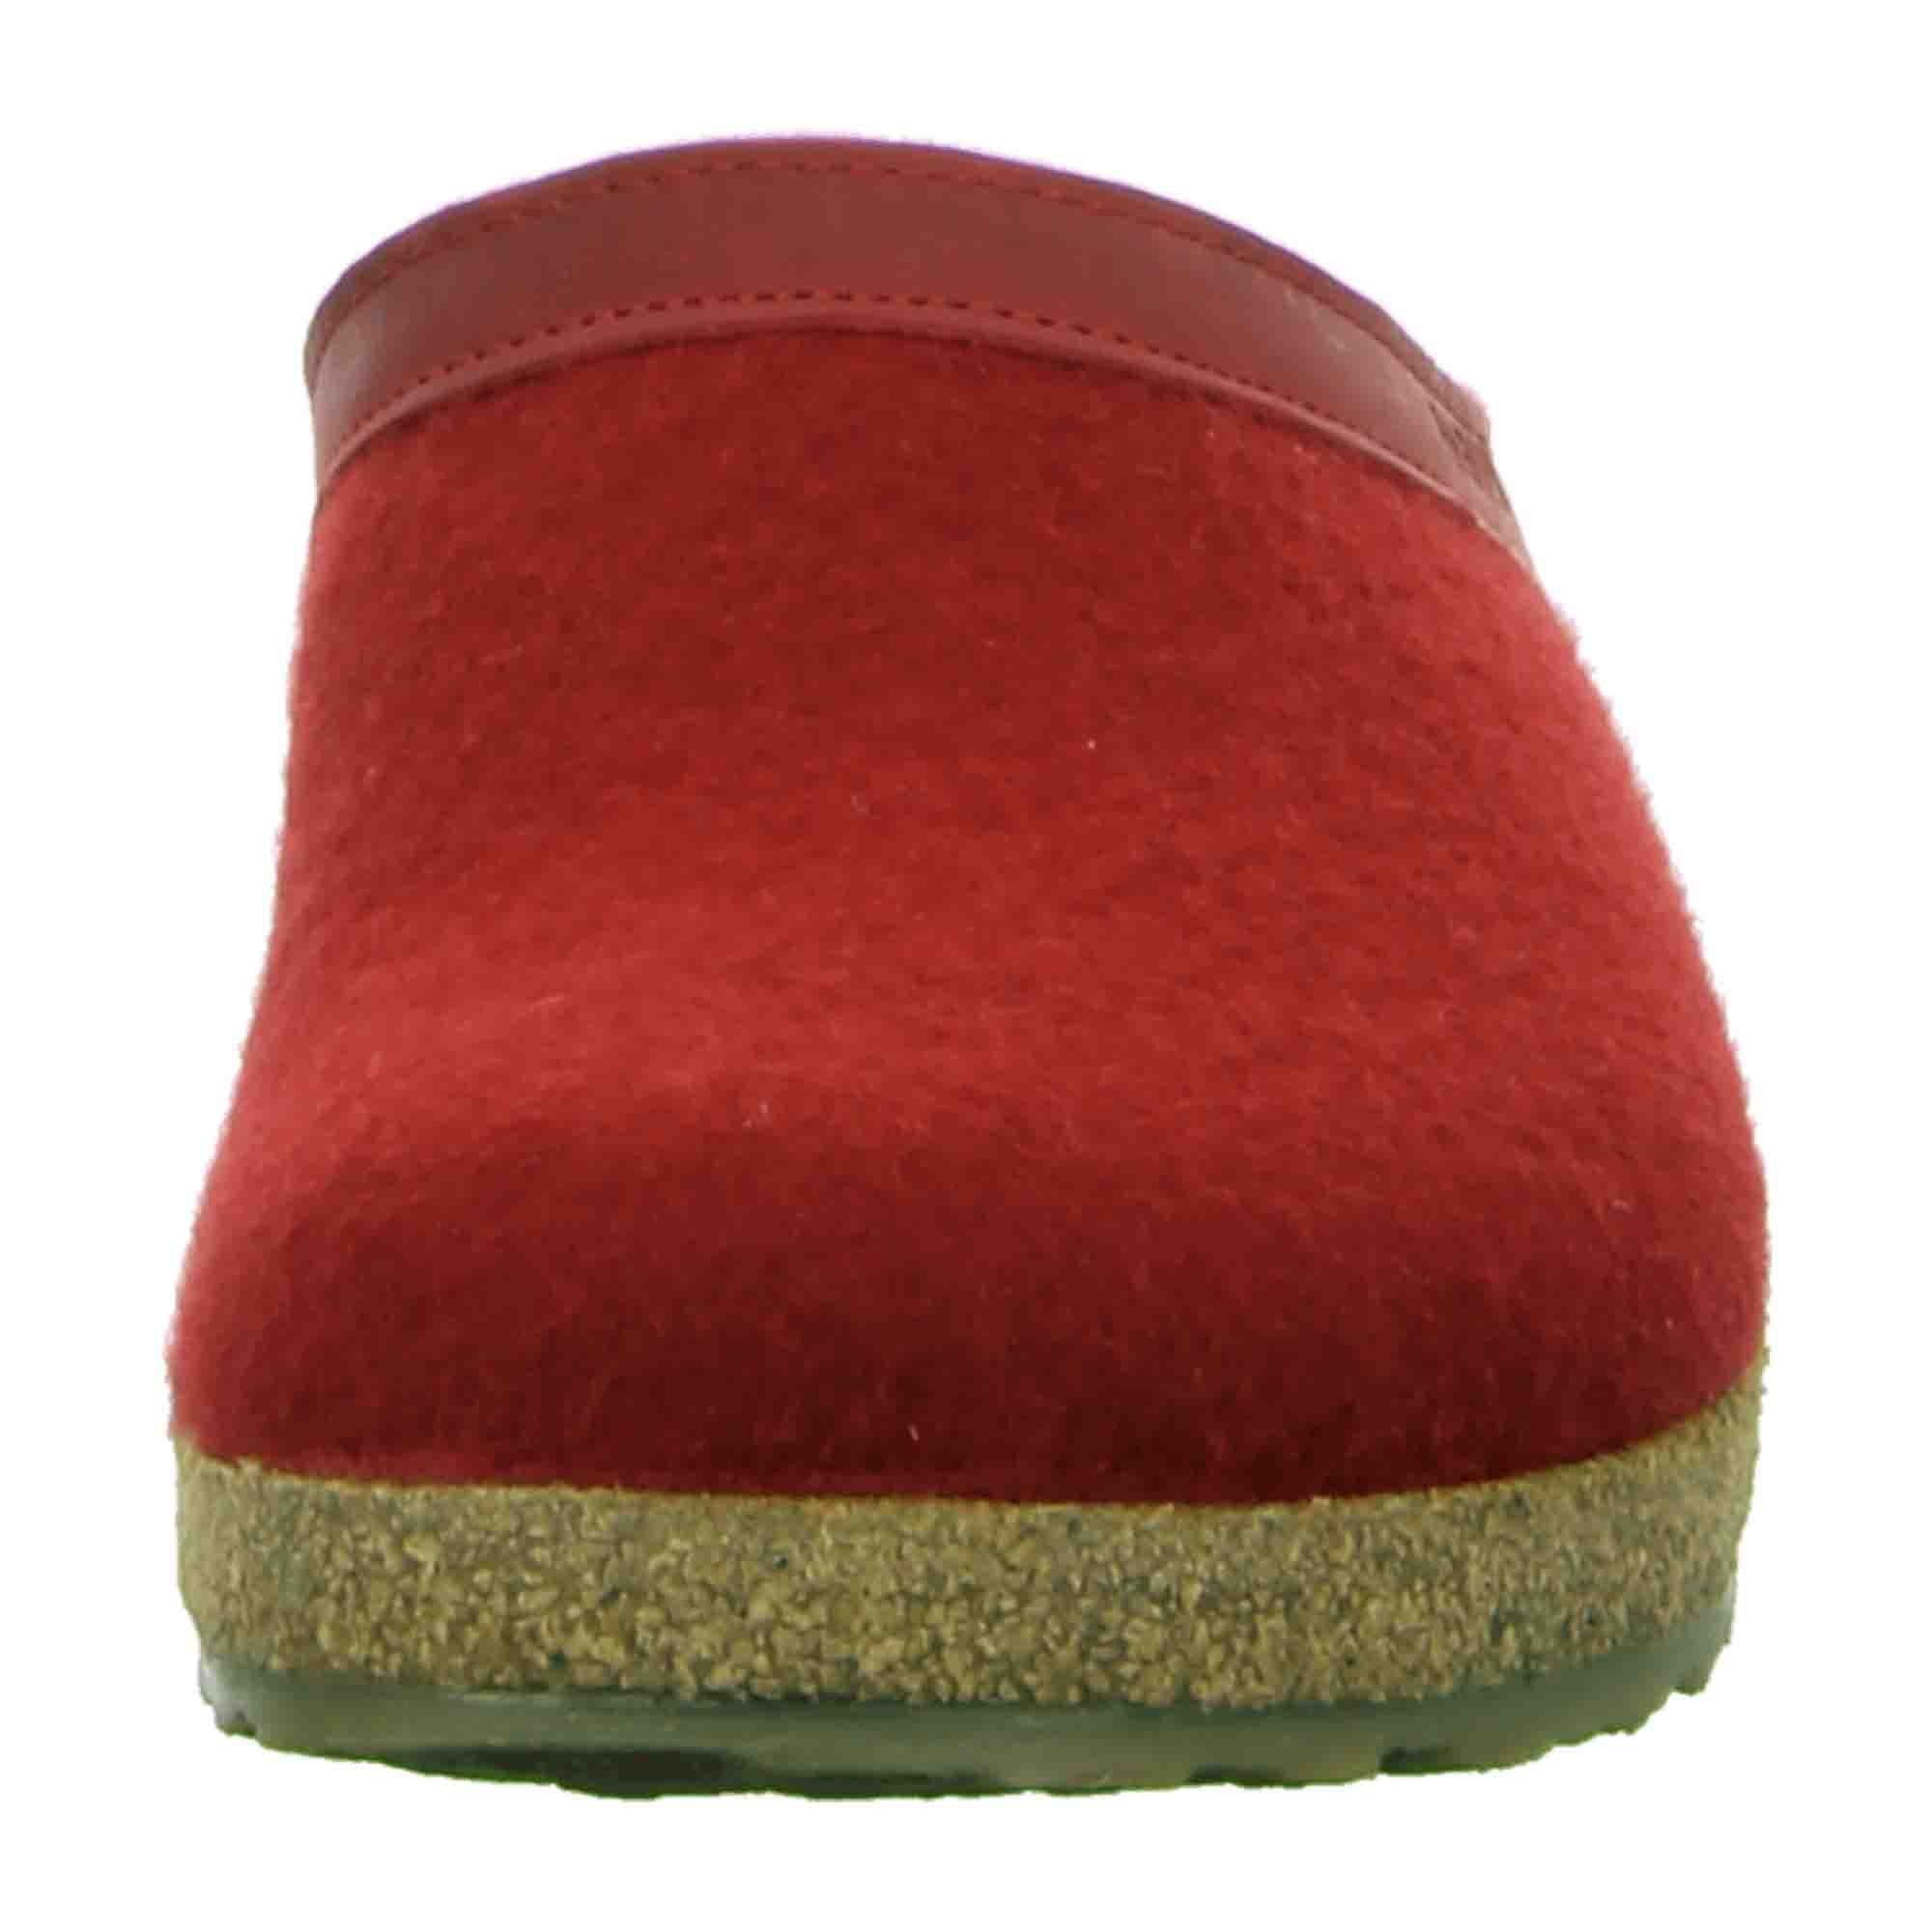 Haflinger Grizzly Torben Men's Clogs, Red – Stylish & Comfortable